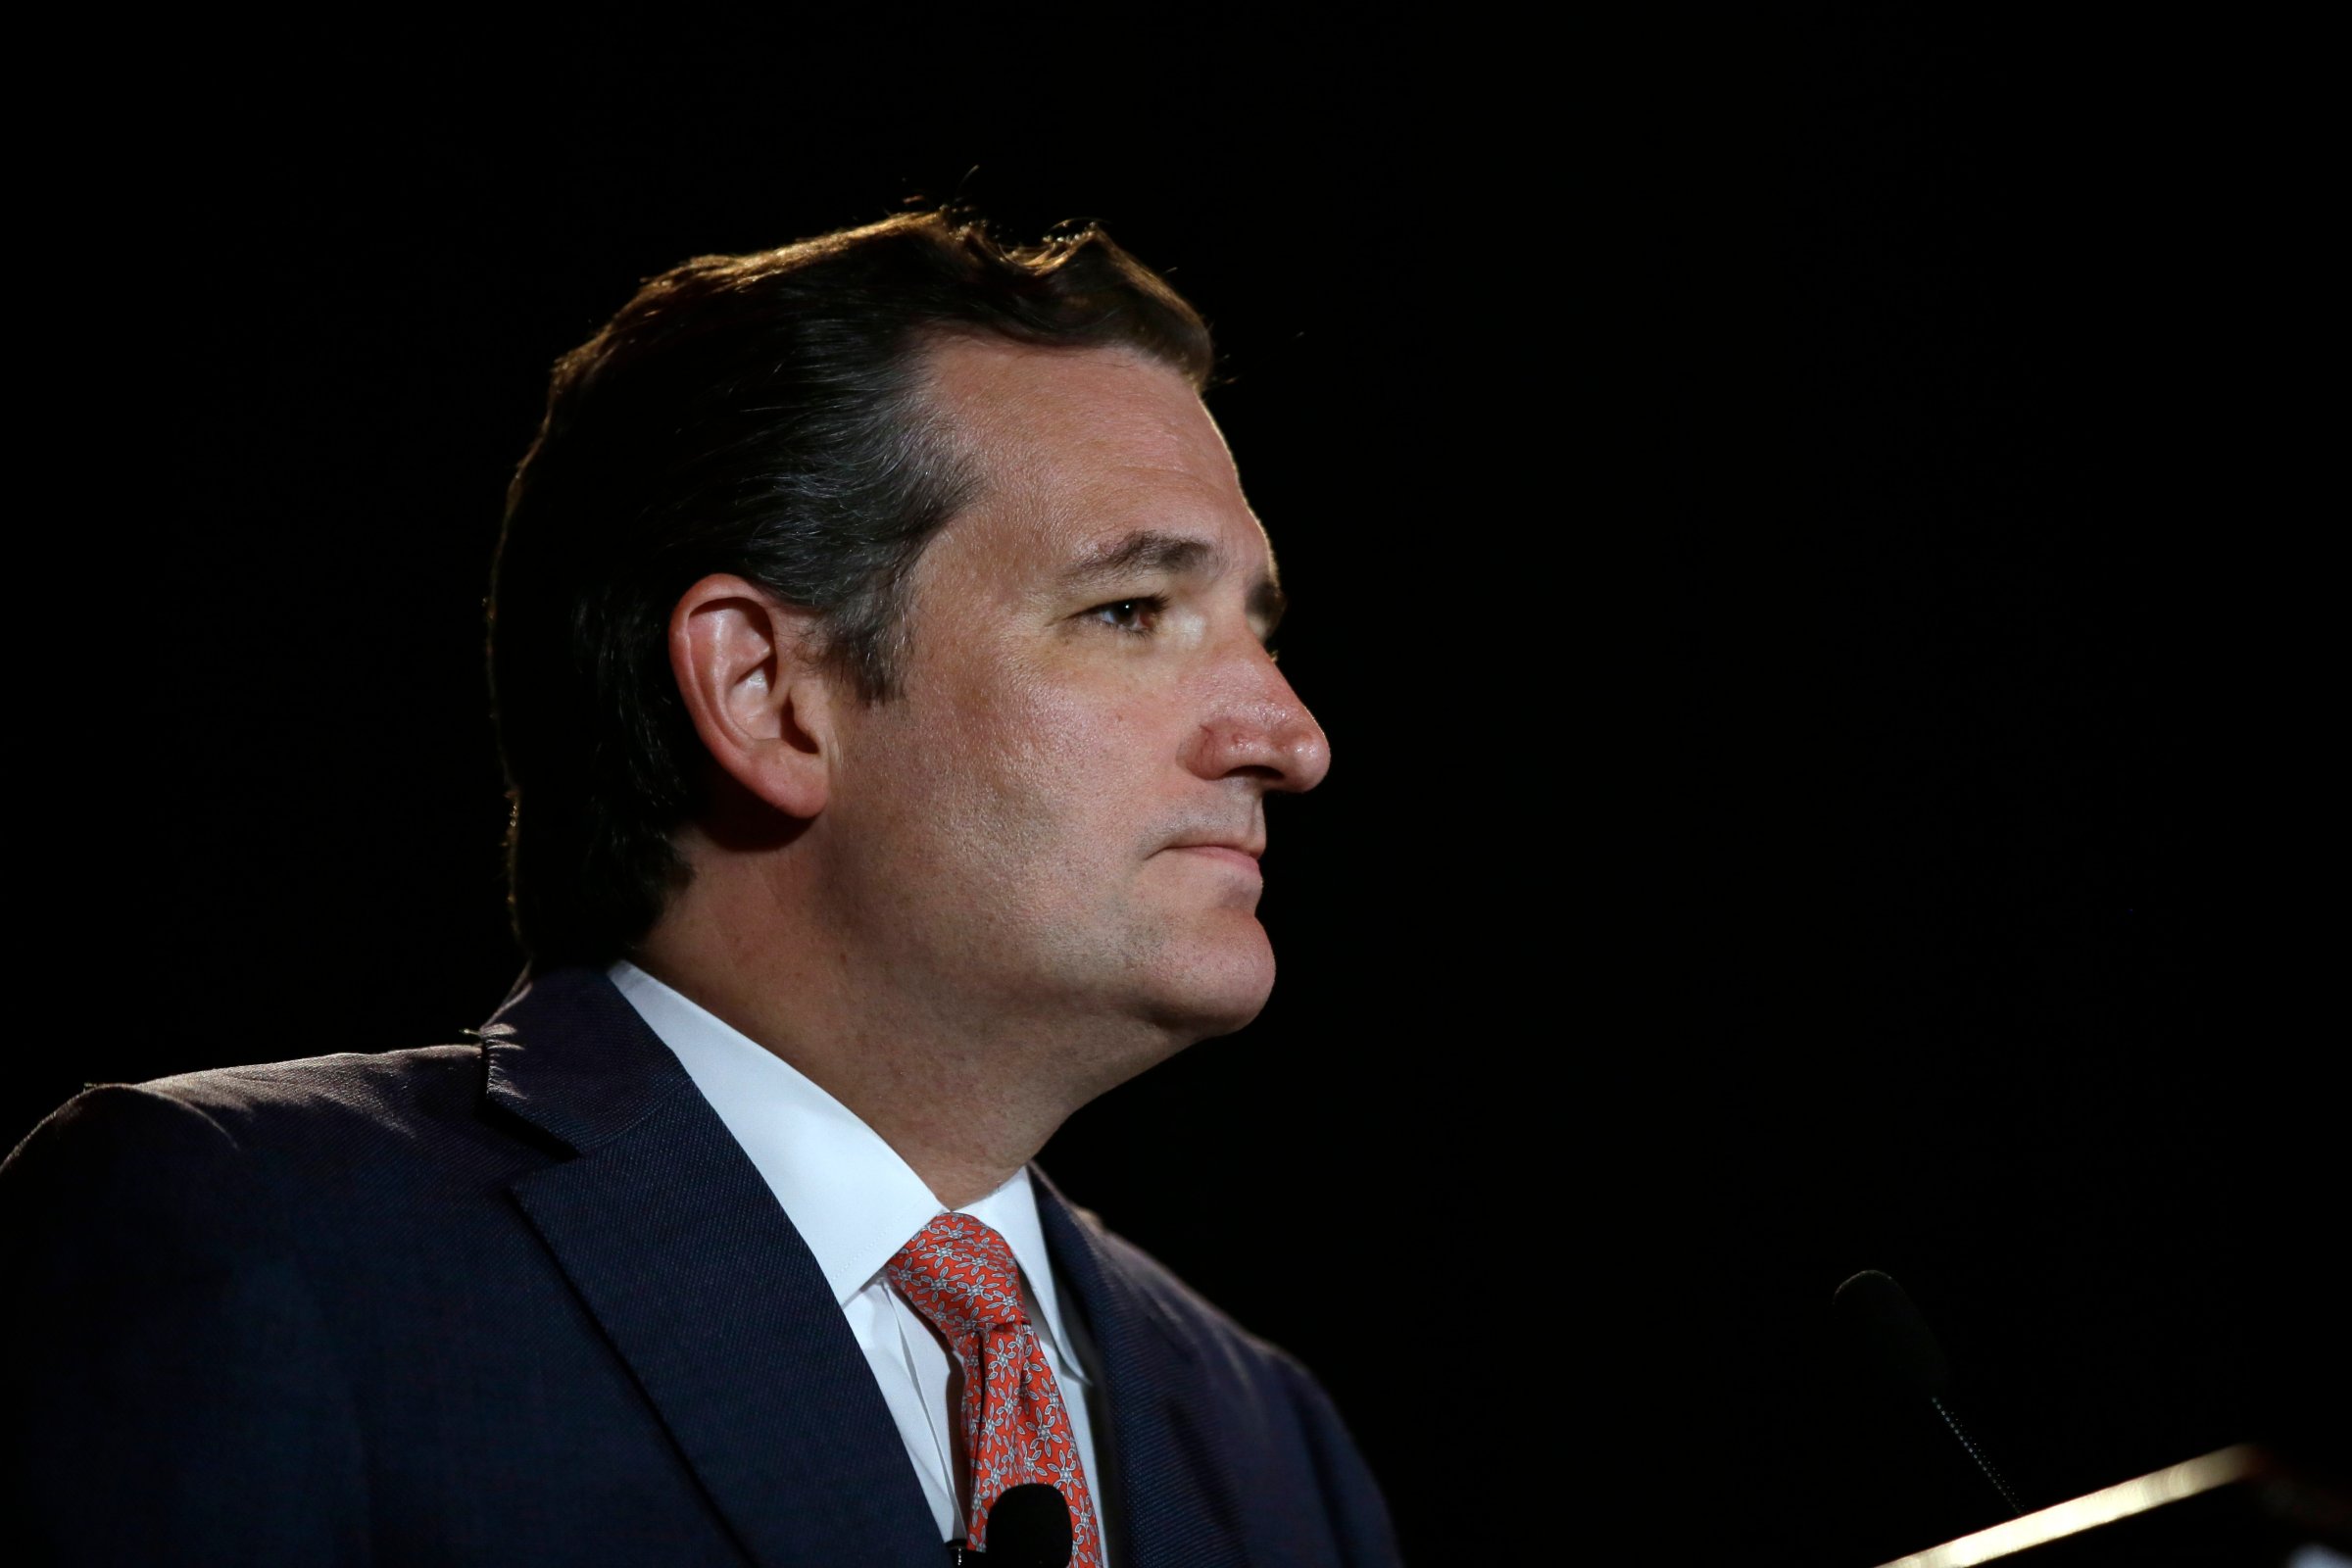 U.S. Sen. Ted Cruz, R-Texas, pauses as he addresses attendees at the 2014 Red State Gathering on Aug. 8, 2014, in Fort Worth, Texas.v